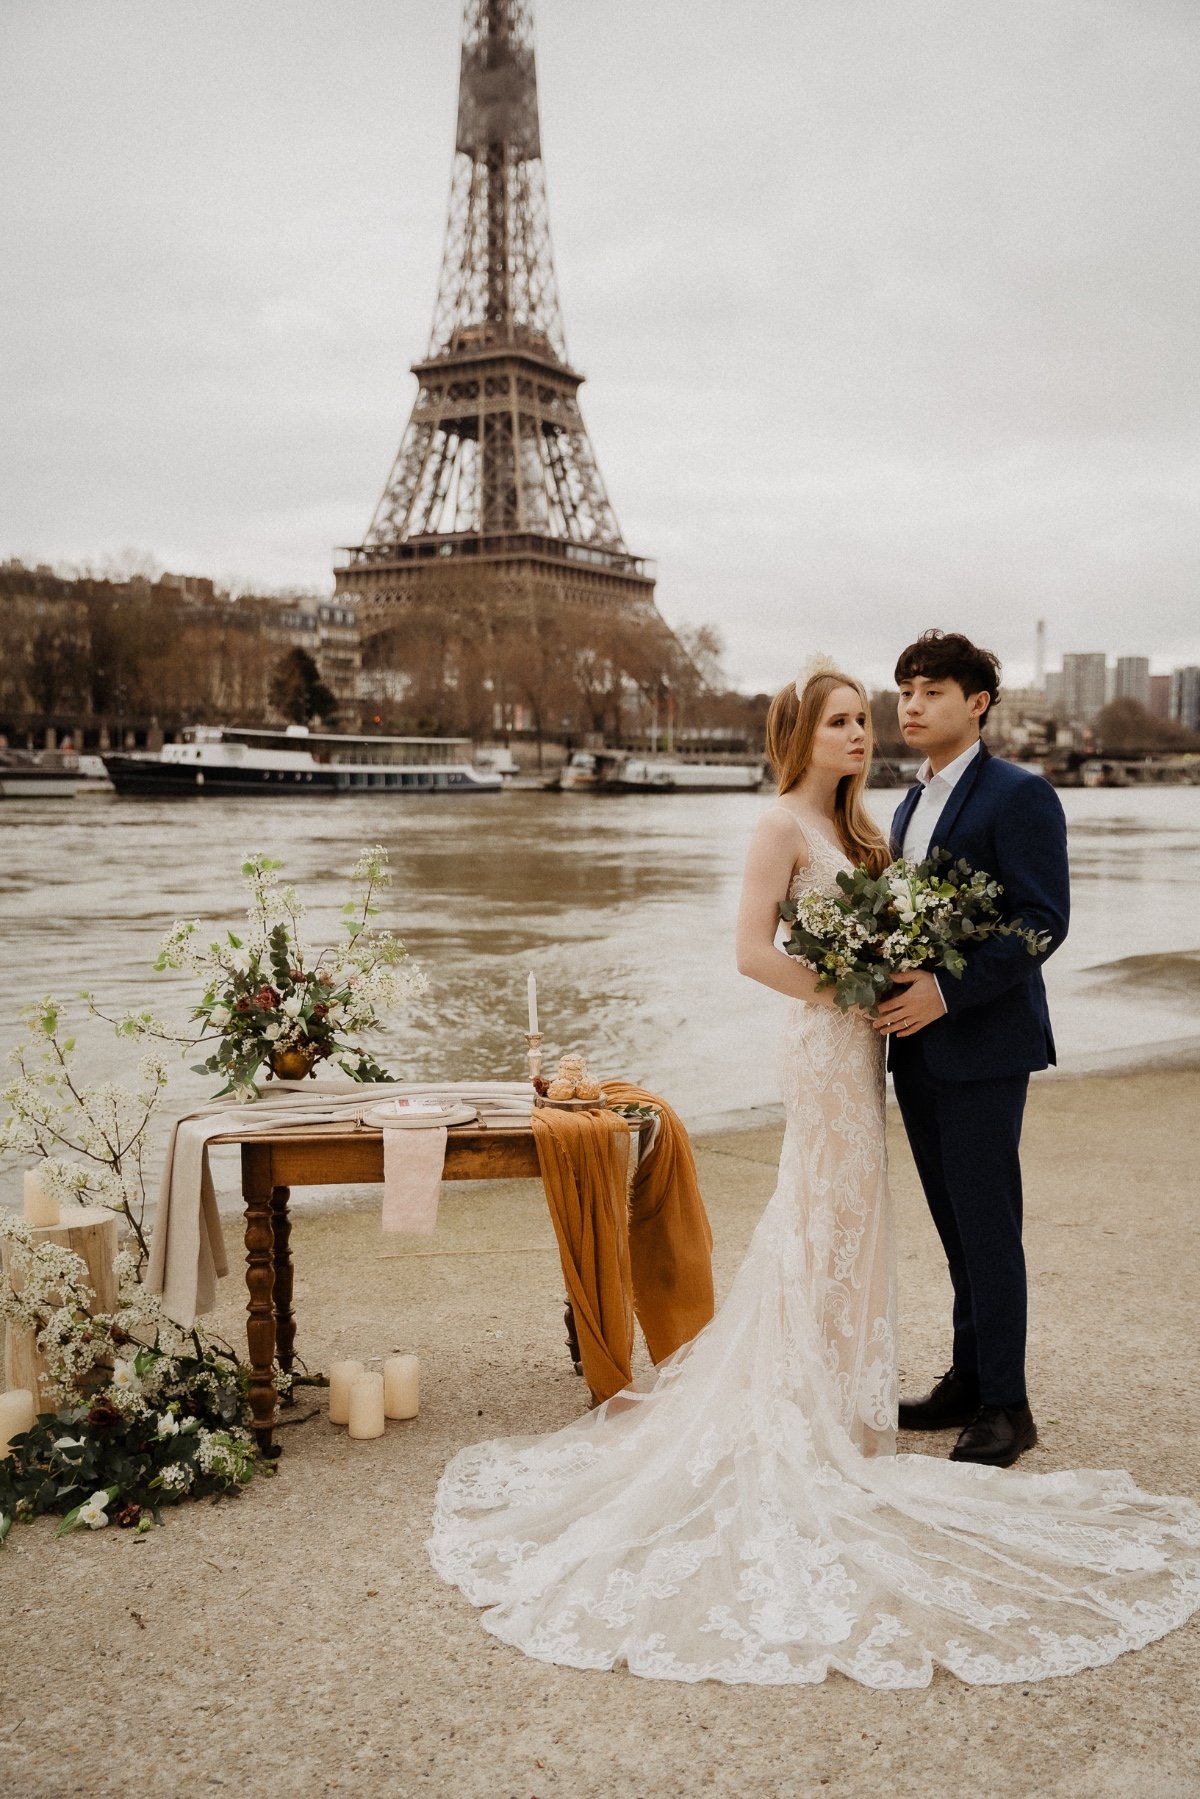 Paris elopement by the Seine River in France